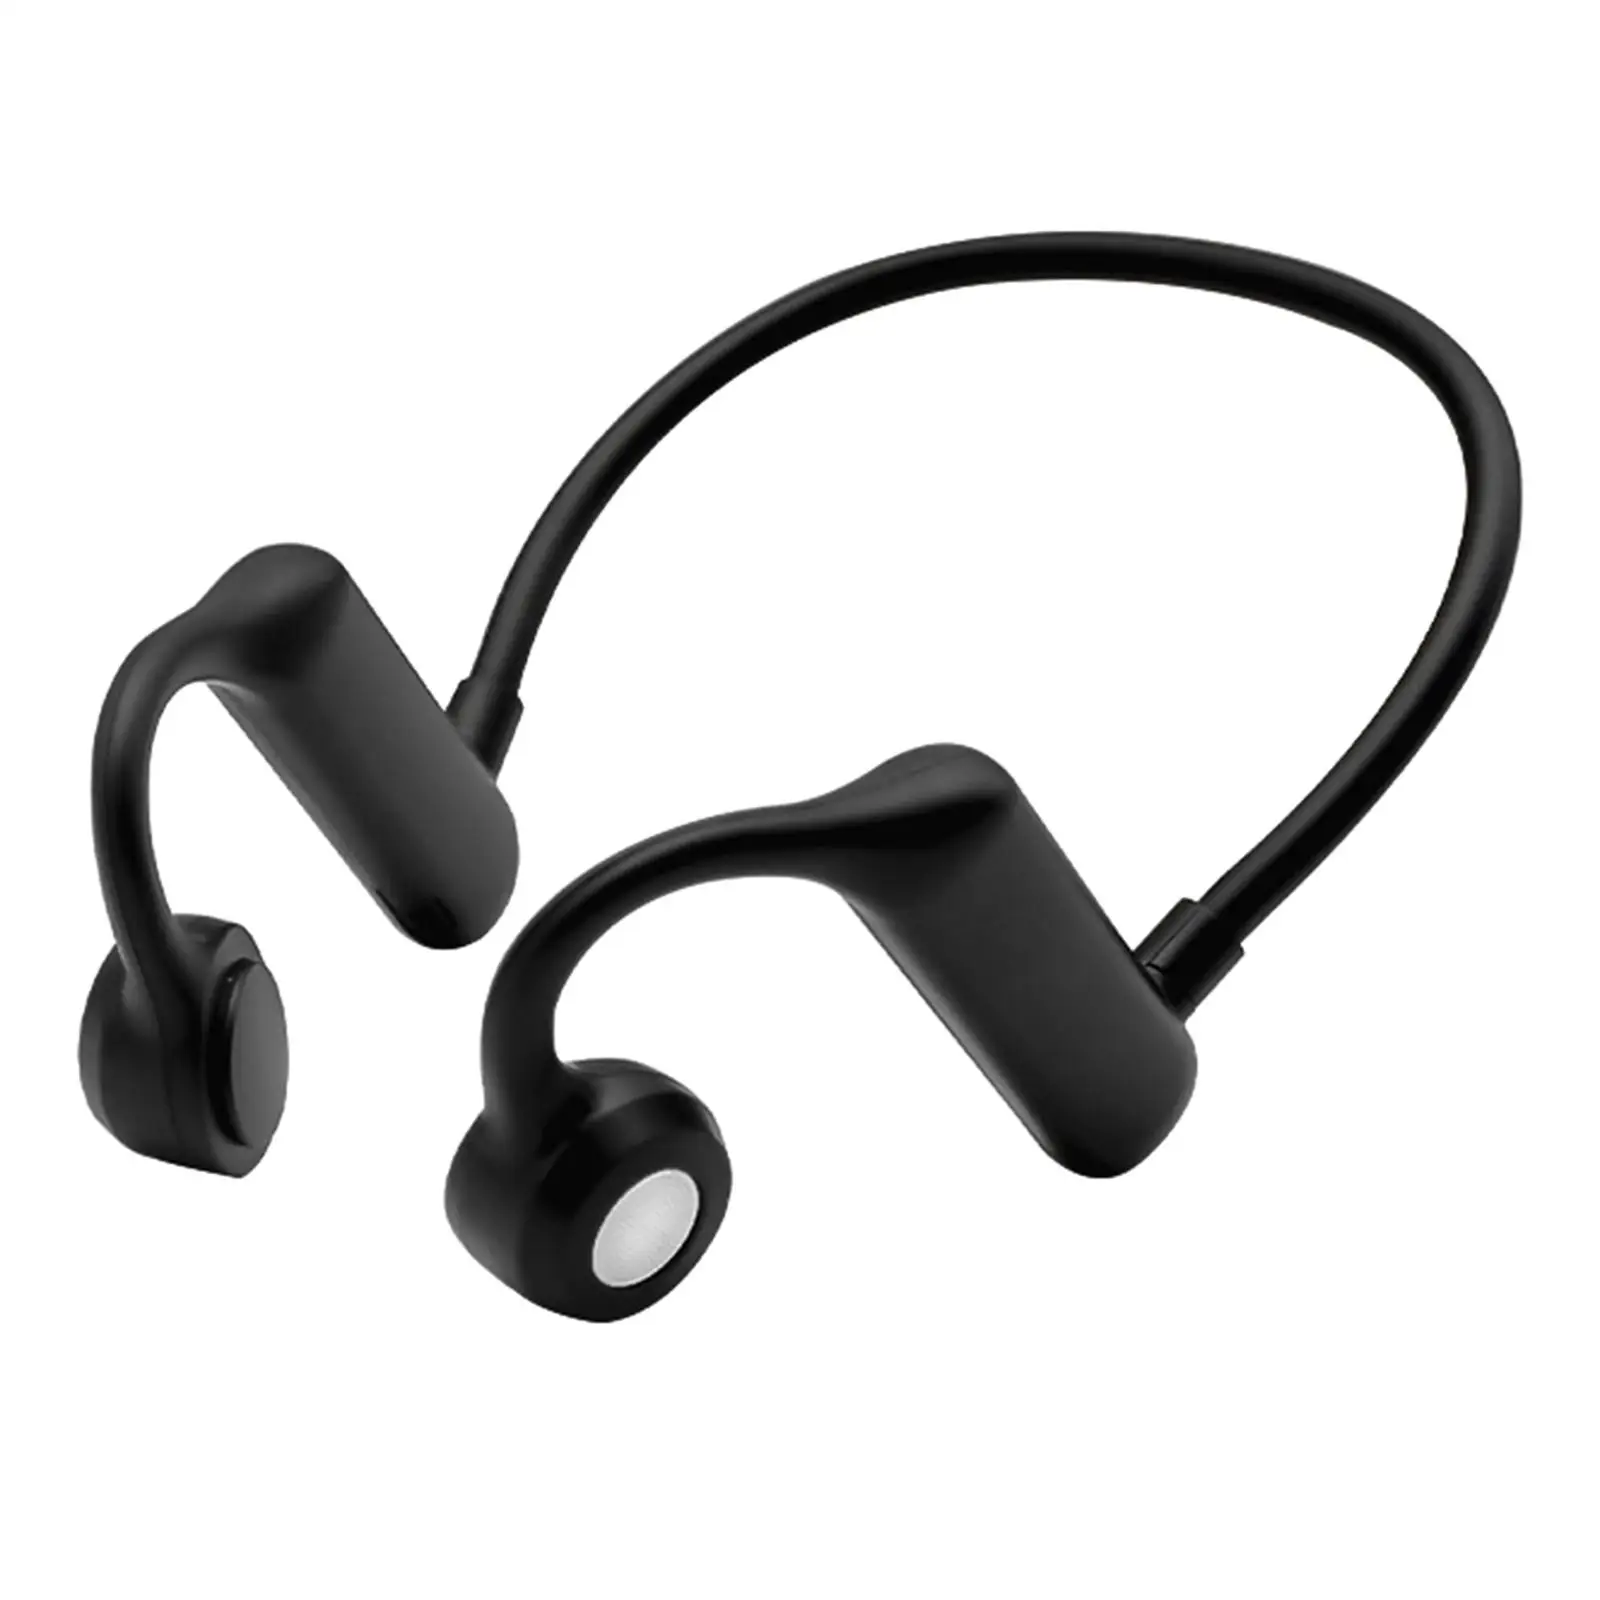 Upgraded Sports Headset Waterproof Lightweight Stereo Music Player Handsfree for Running Walking Fitness Home